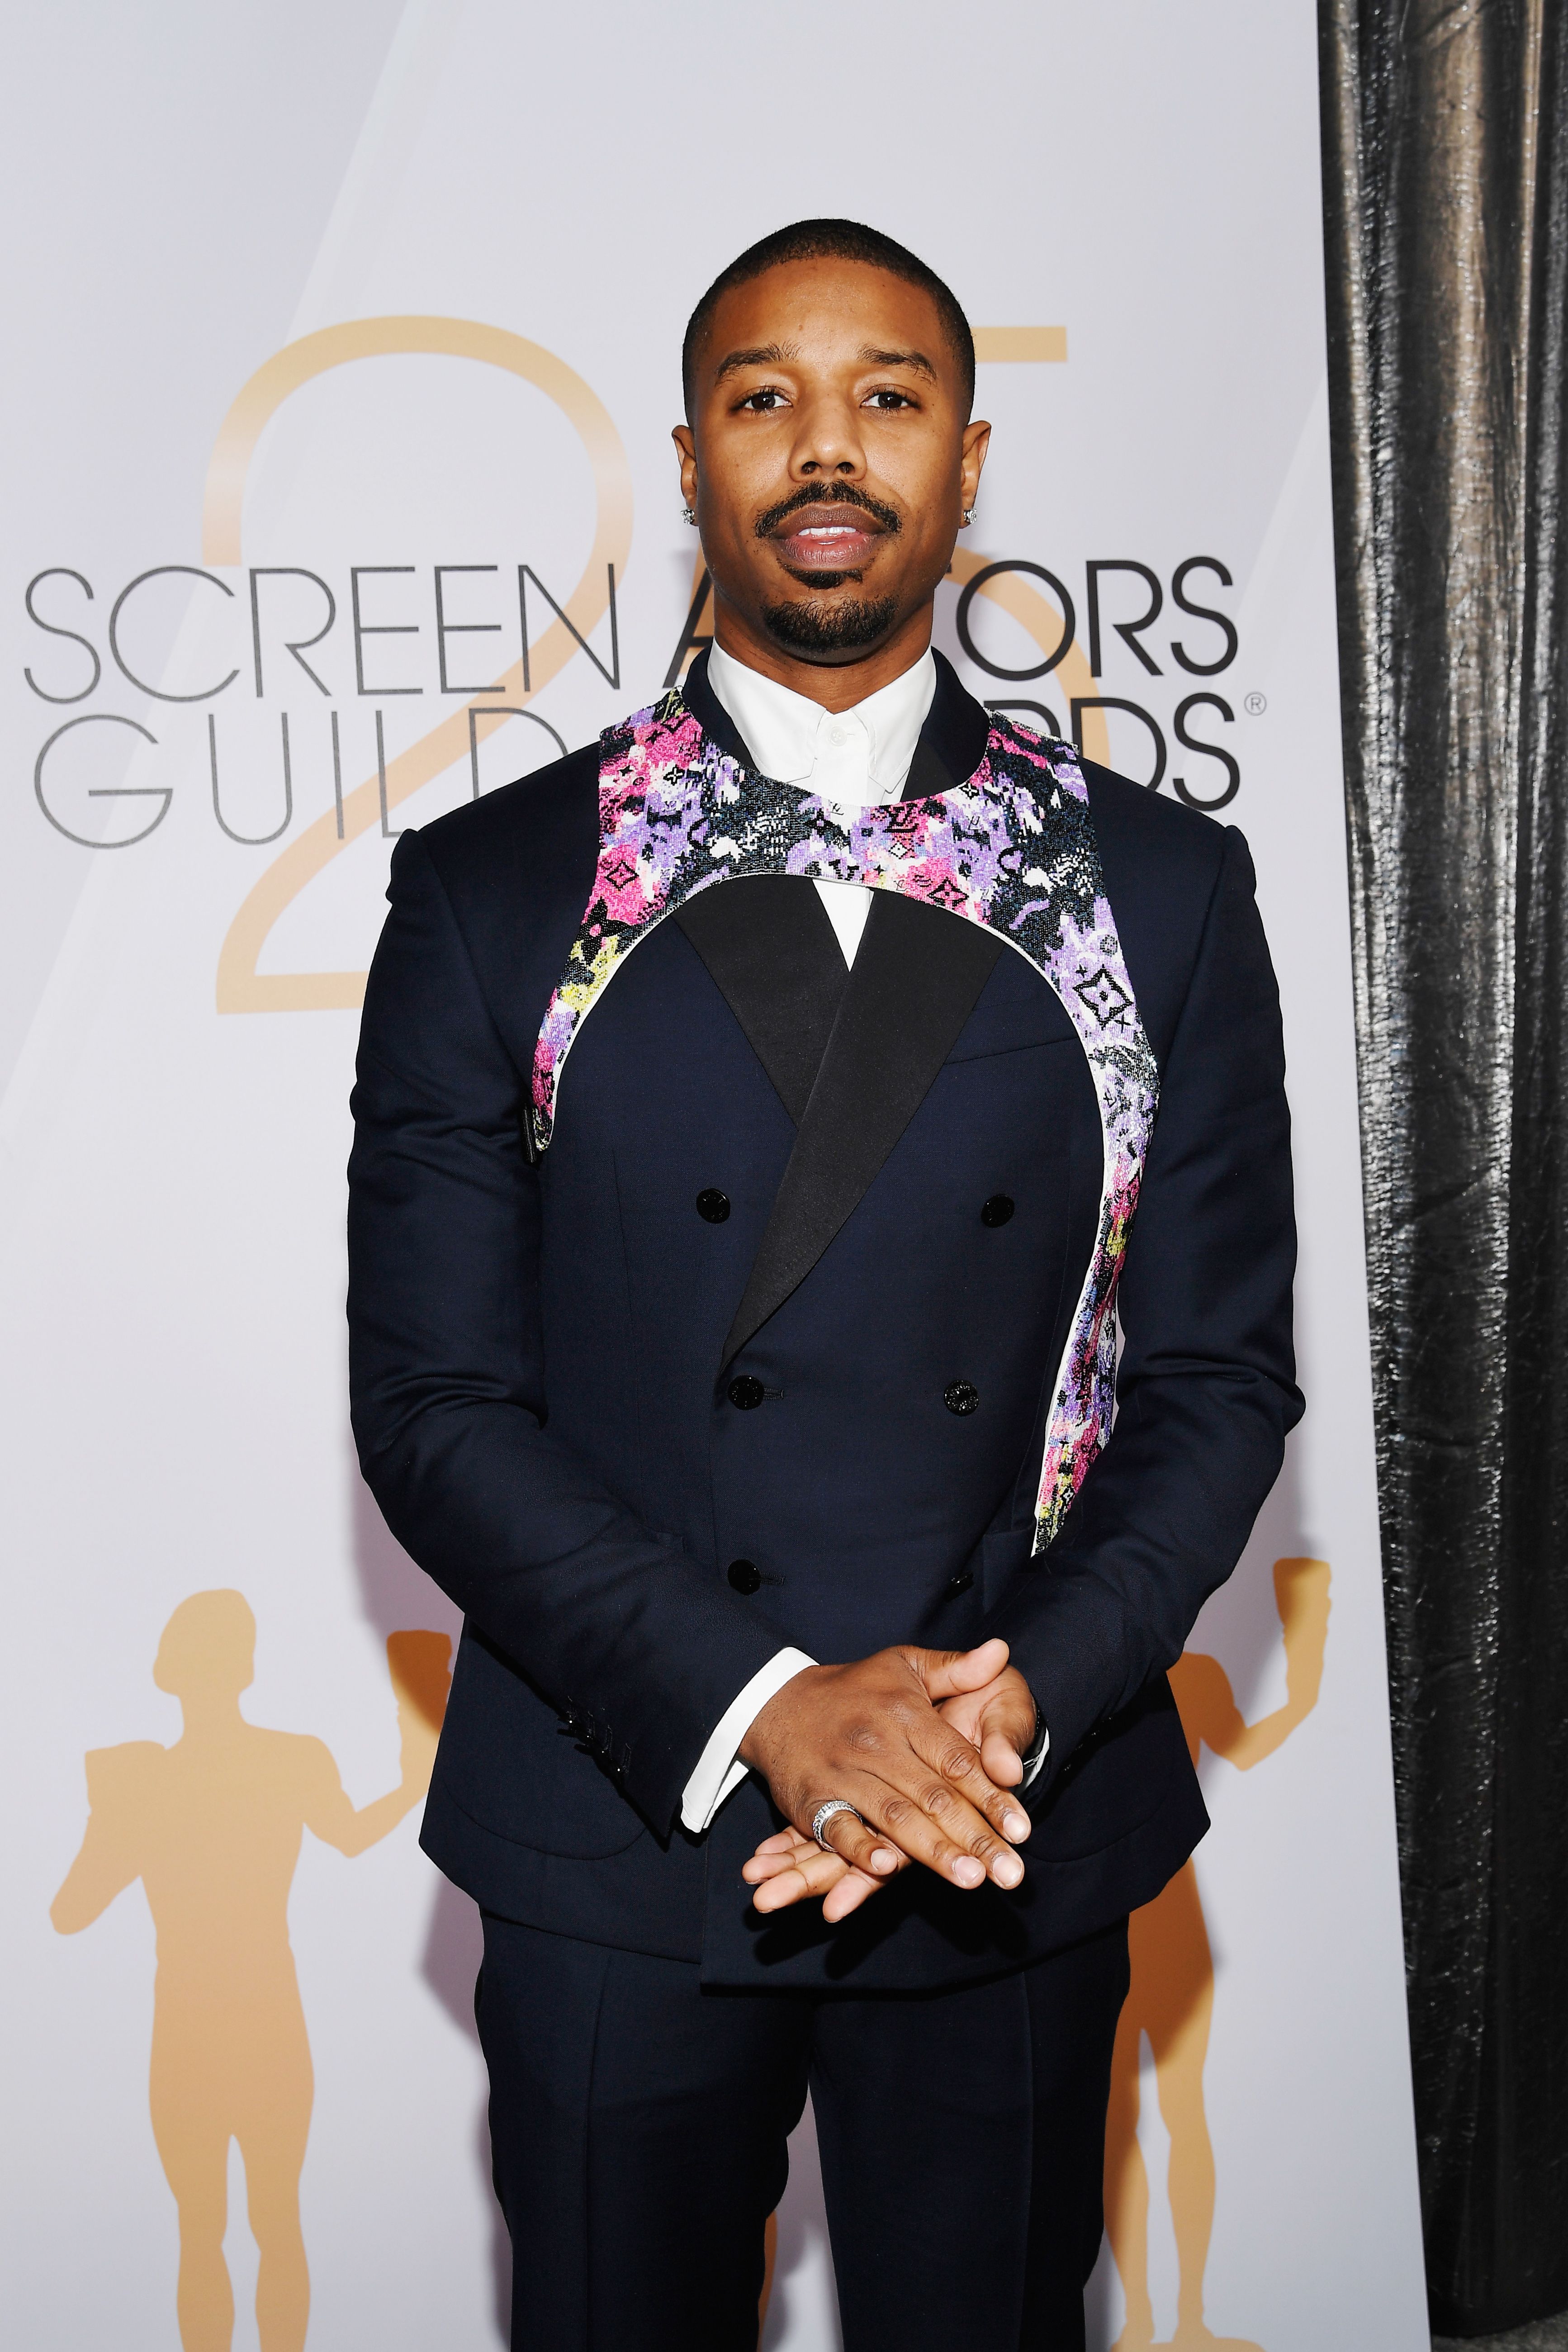 Timothee Chalamet and Michael B Jordan's harnesses are 'empowering